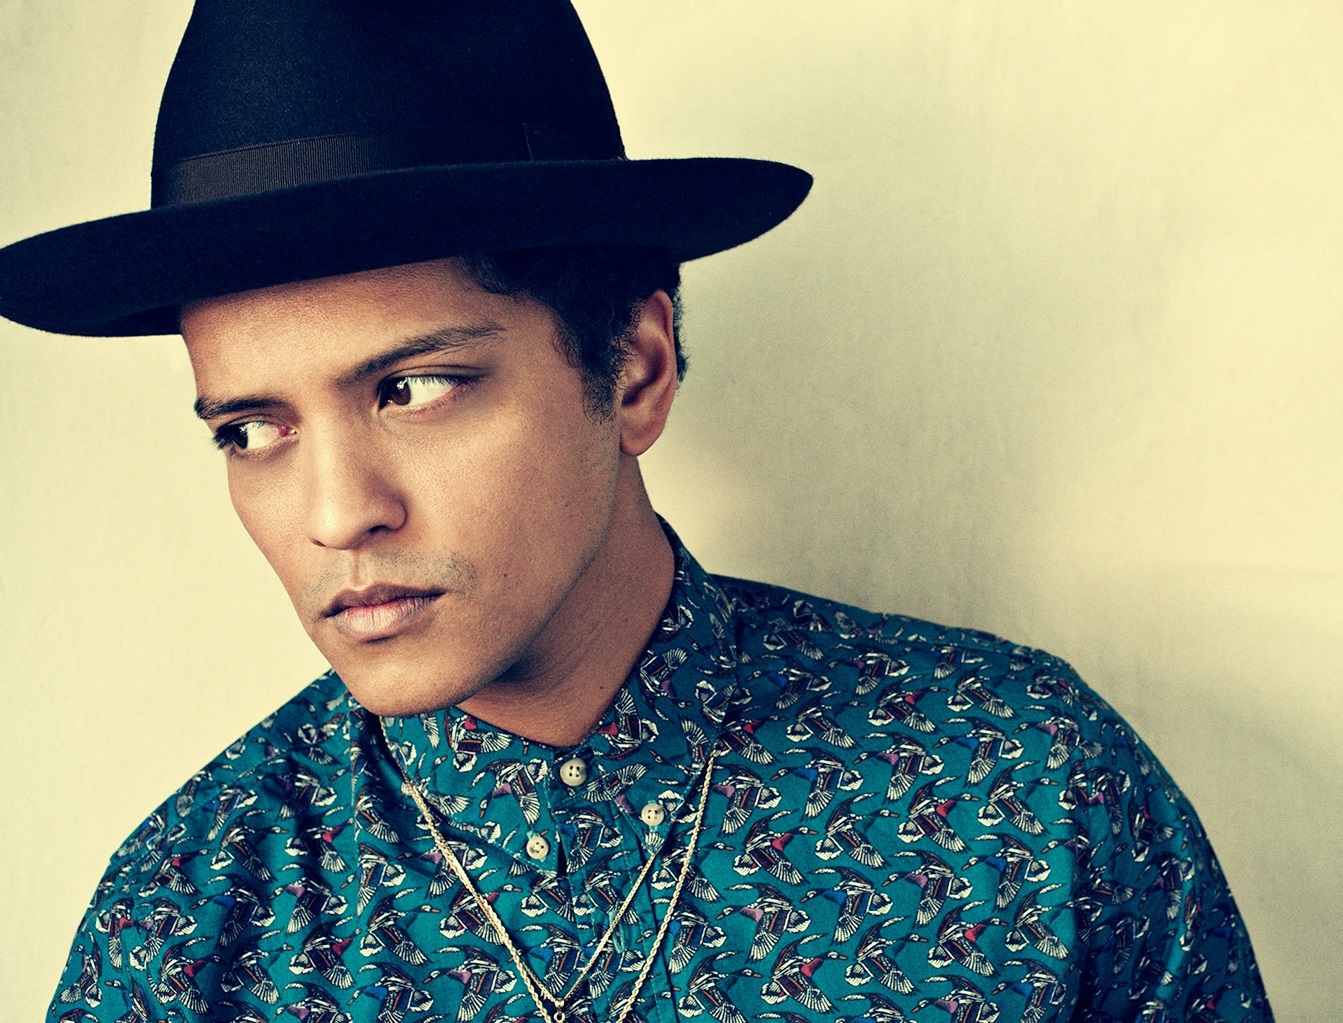 "Phenomenon" Bruno Mars causes fever in the music industry after 4 years of absence - 1